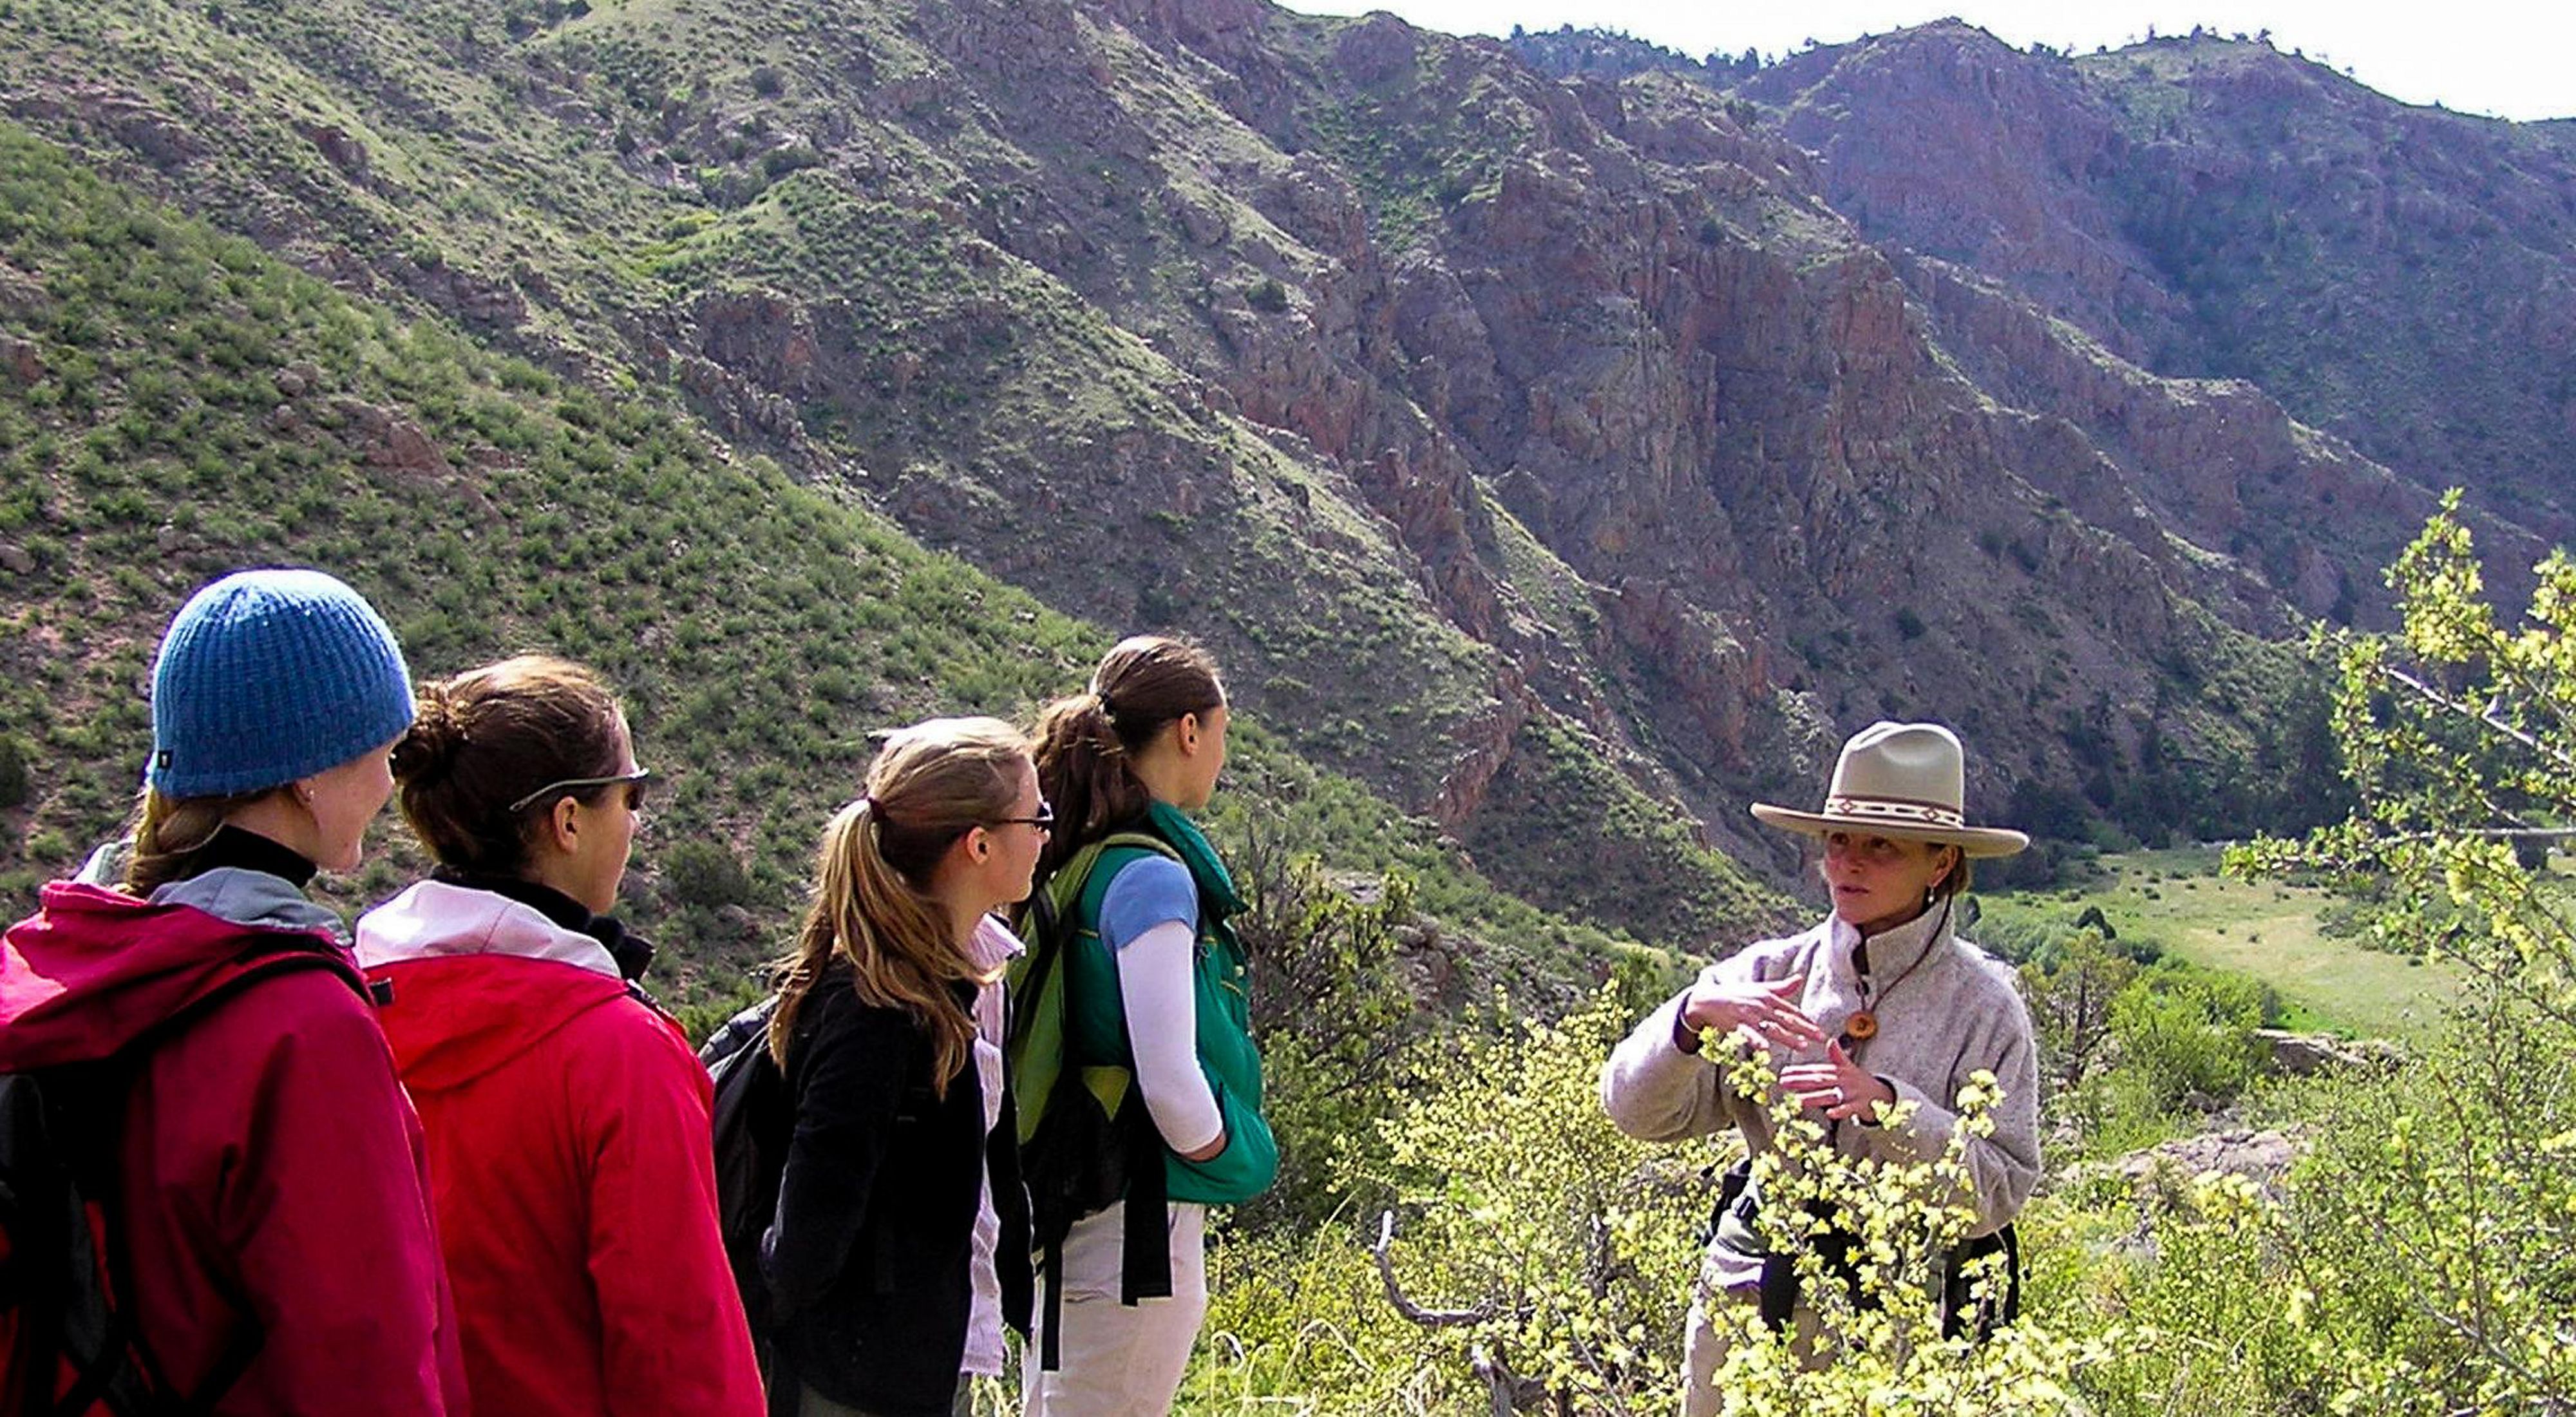 A hiking guide is talking to four hikers in a canyon.